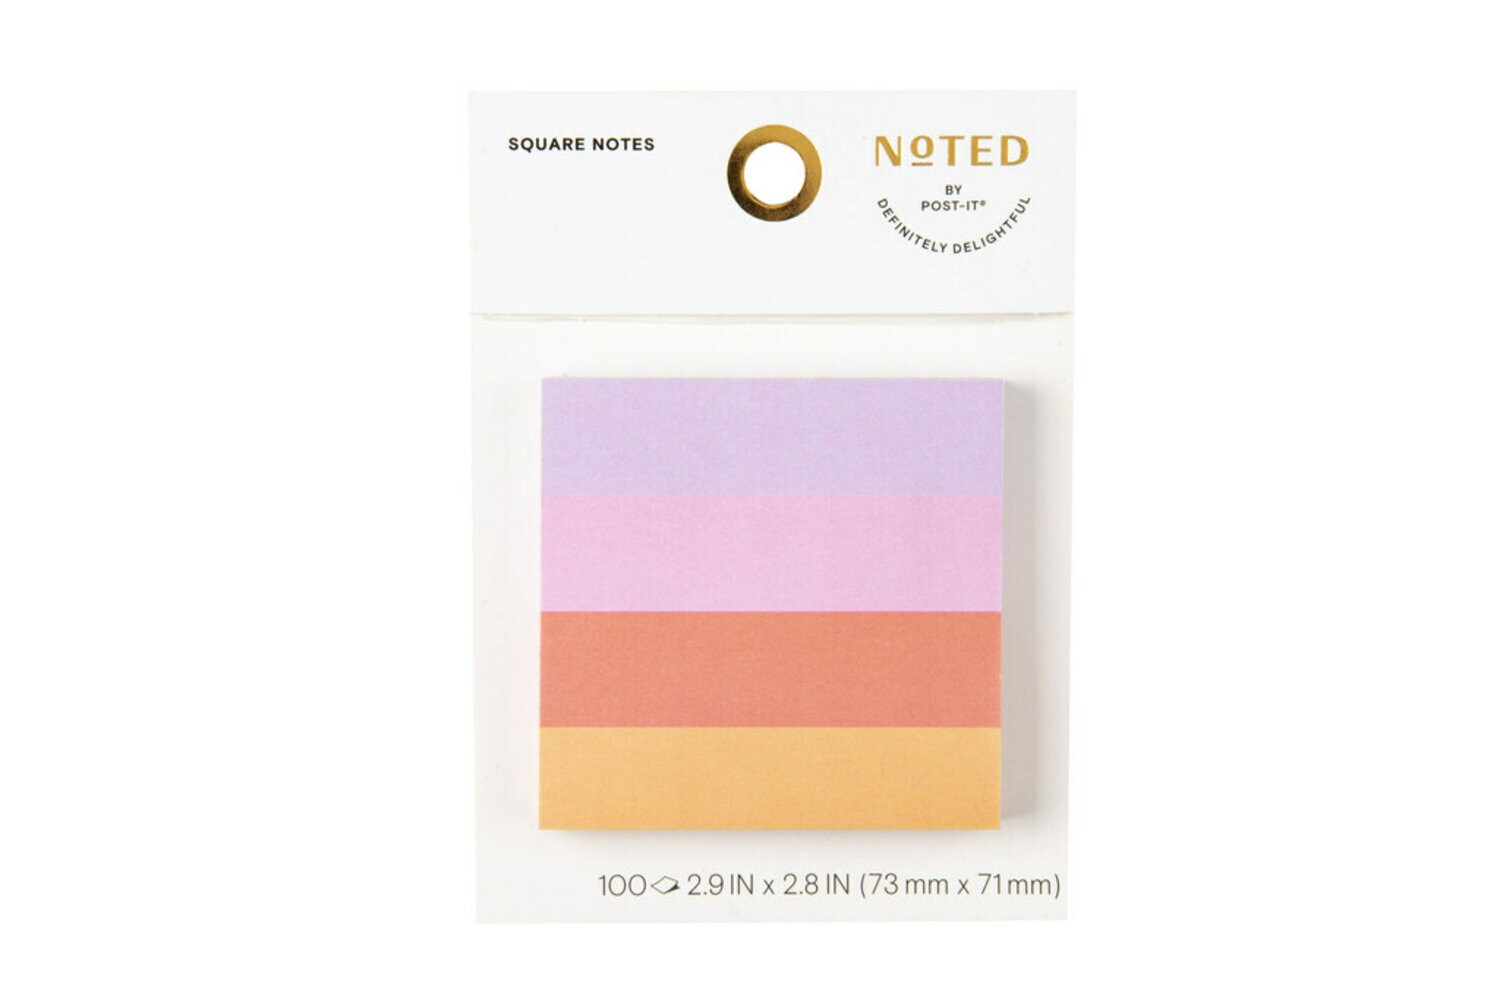 7100264913 - Post-it Printed Notes NTD5-33-LIL, 2.9 in x 2.8 in (73 mm x 71 mm)